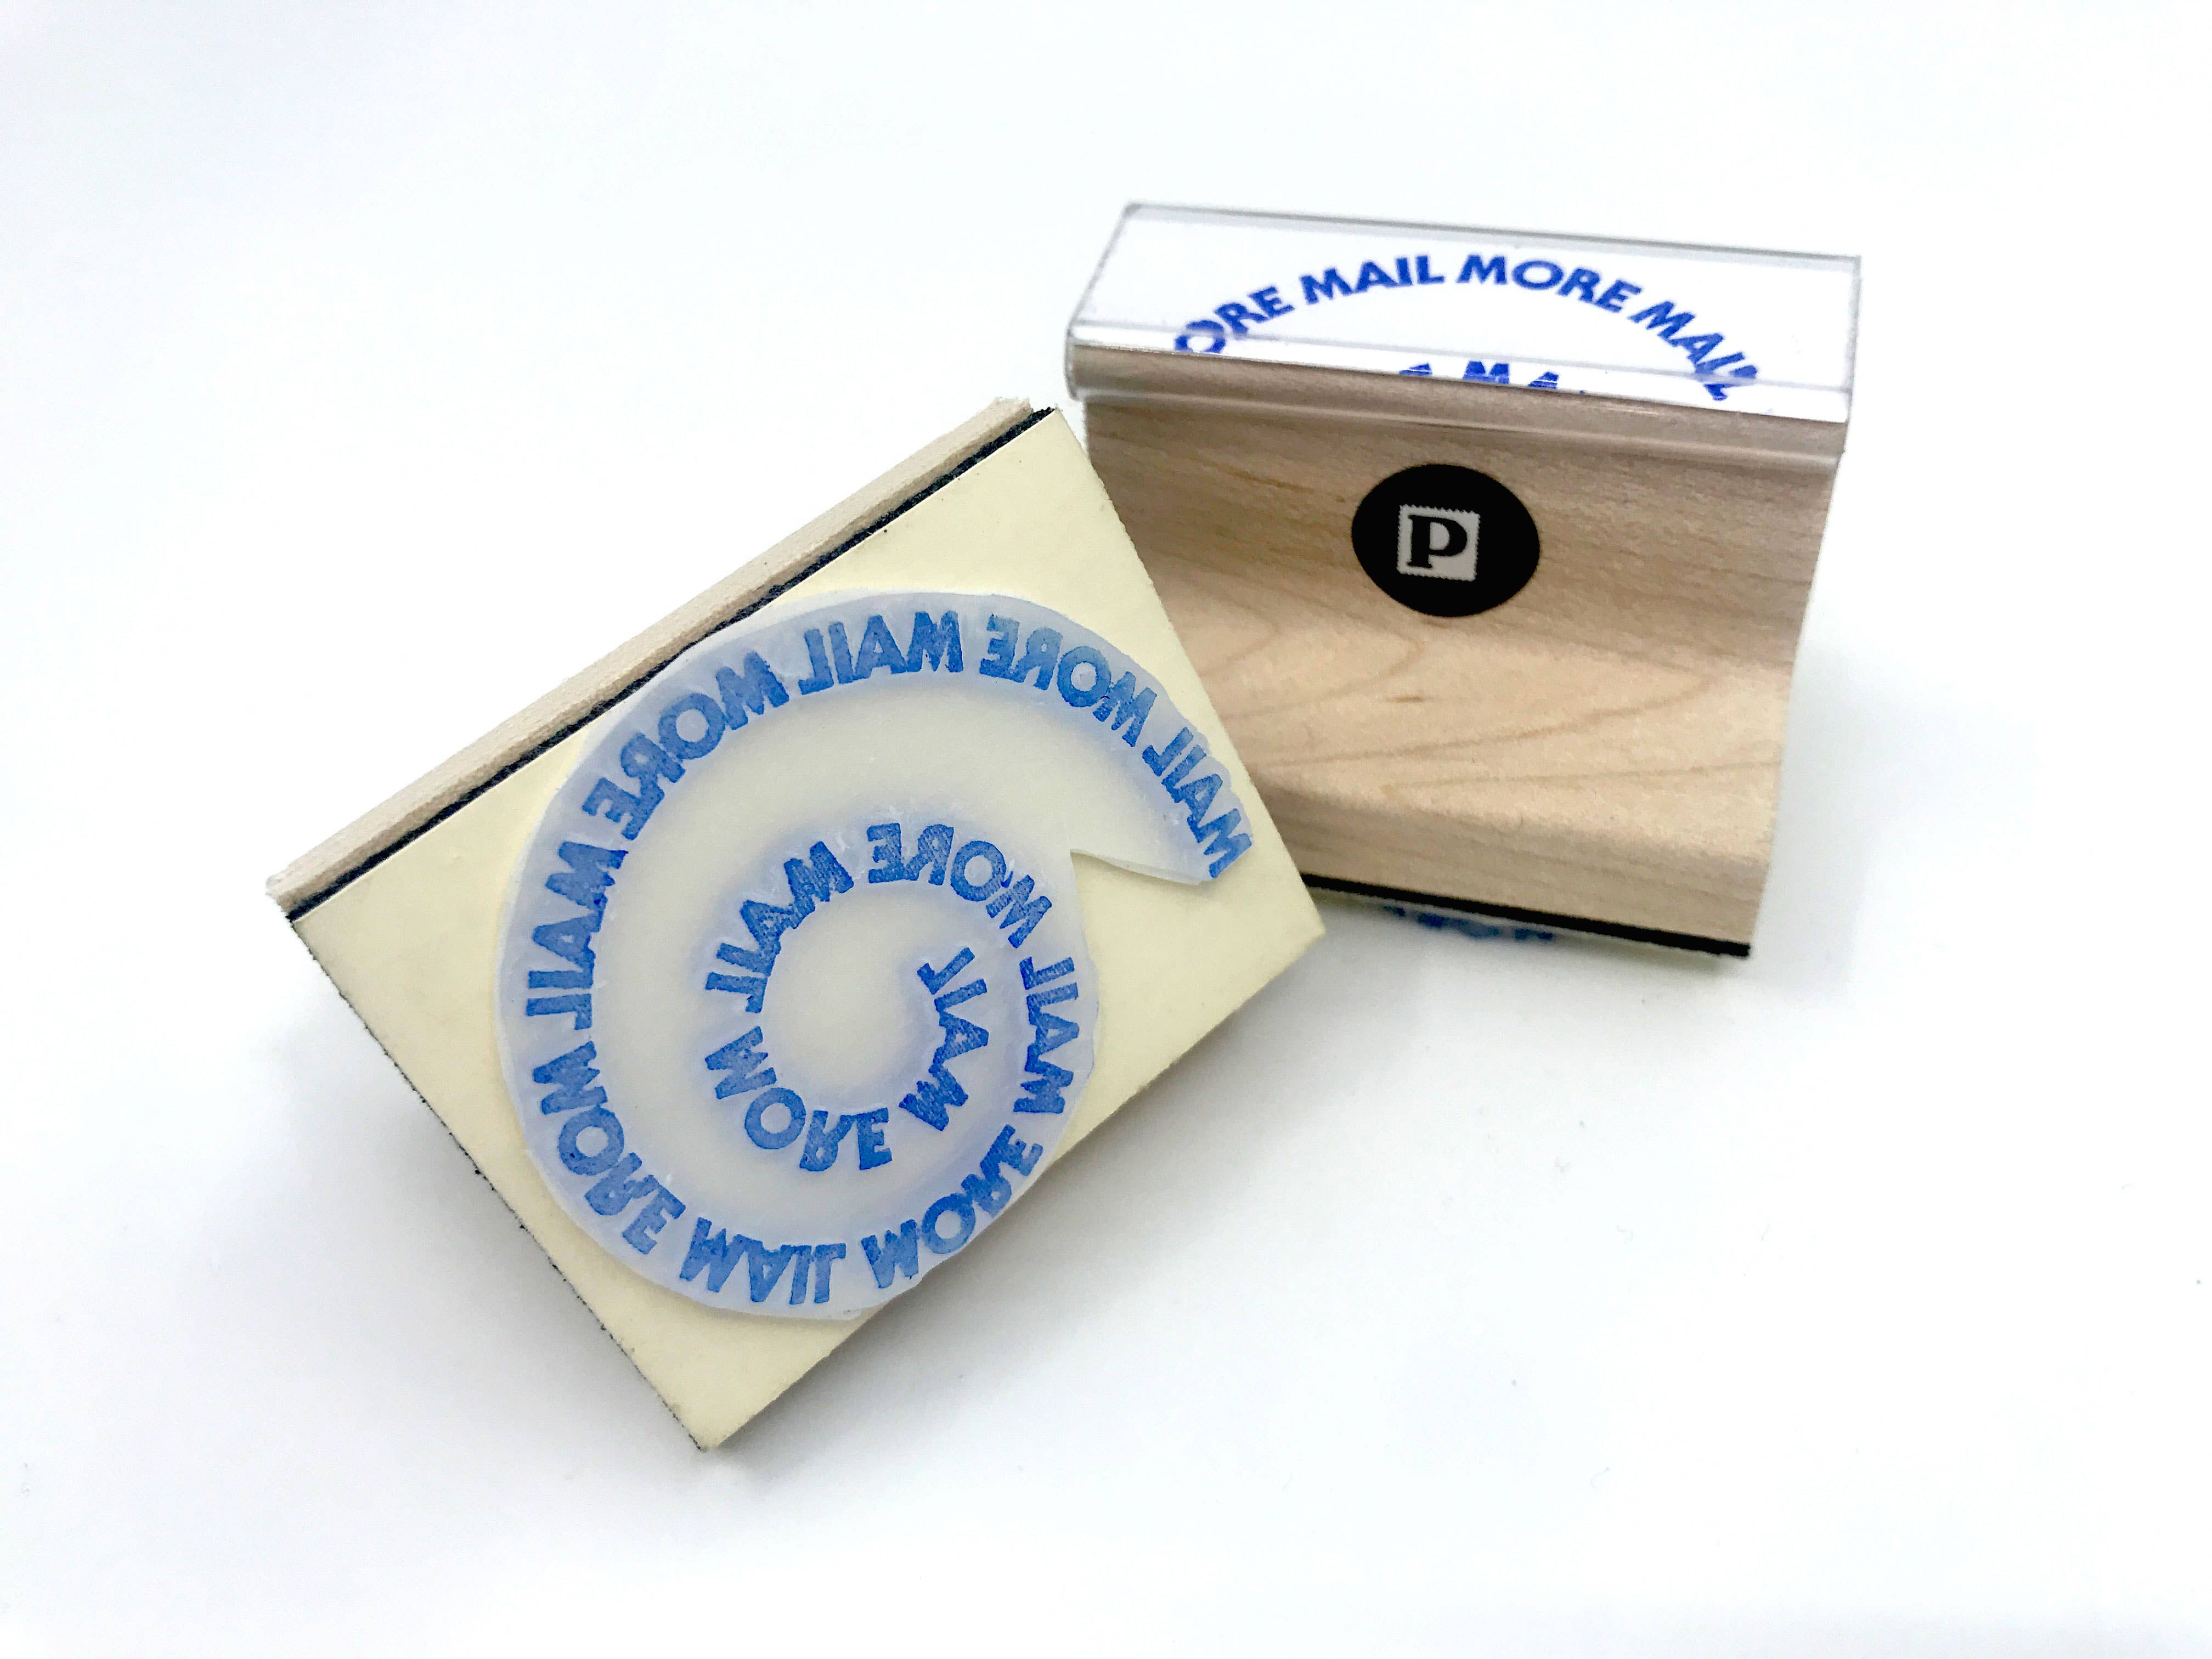 Wooden Handle Rubber Stamp | Mail More Mail Spiral